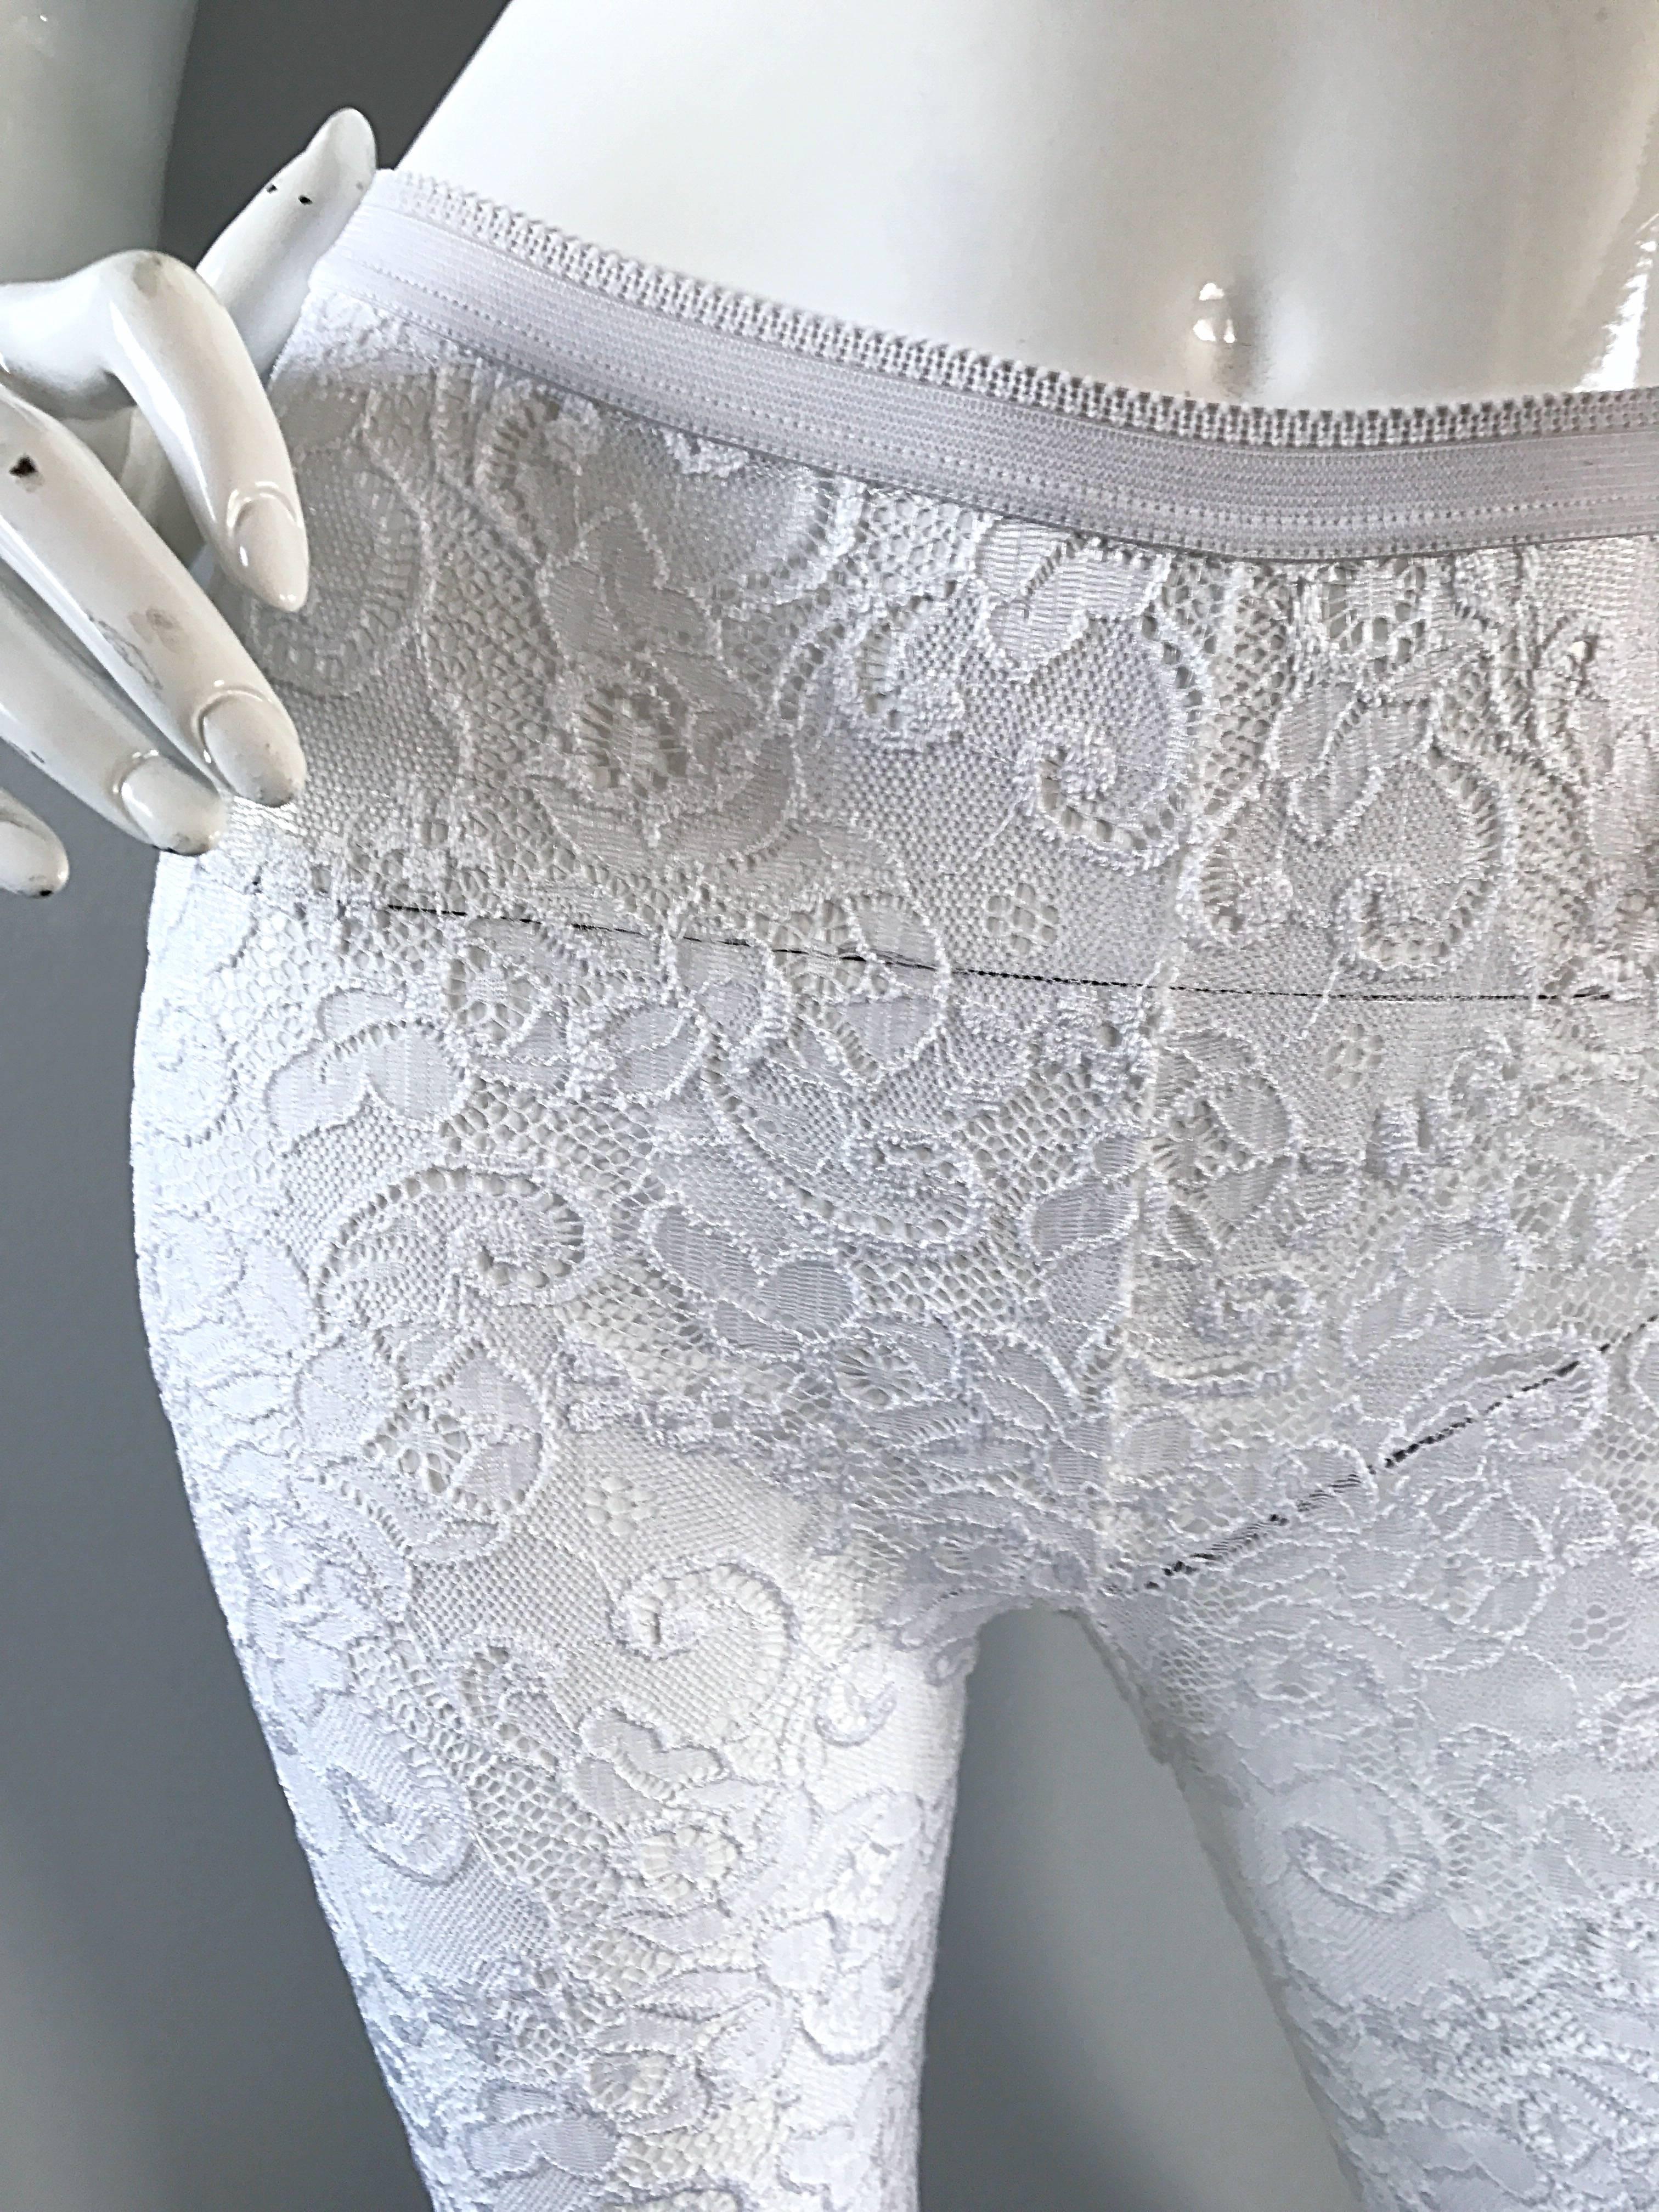 Rare brand new vintage 90s GIANNI VERSACE COUTURE white French lace leggings / stockings! Sexy, yet sophisticated at the same time. High waisted style can be worn with a dress, skirt, shorts, or with a tunic. In brand new, never worn condition. Made